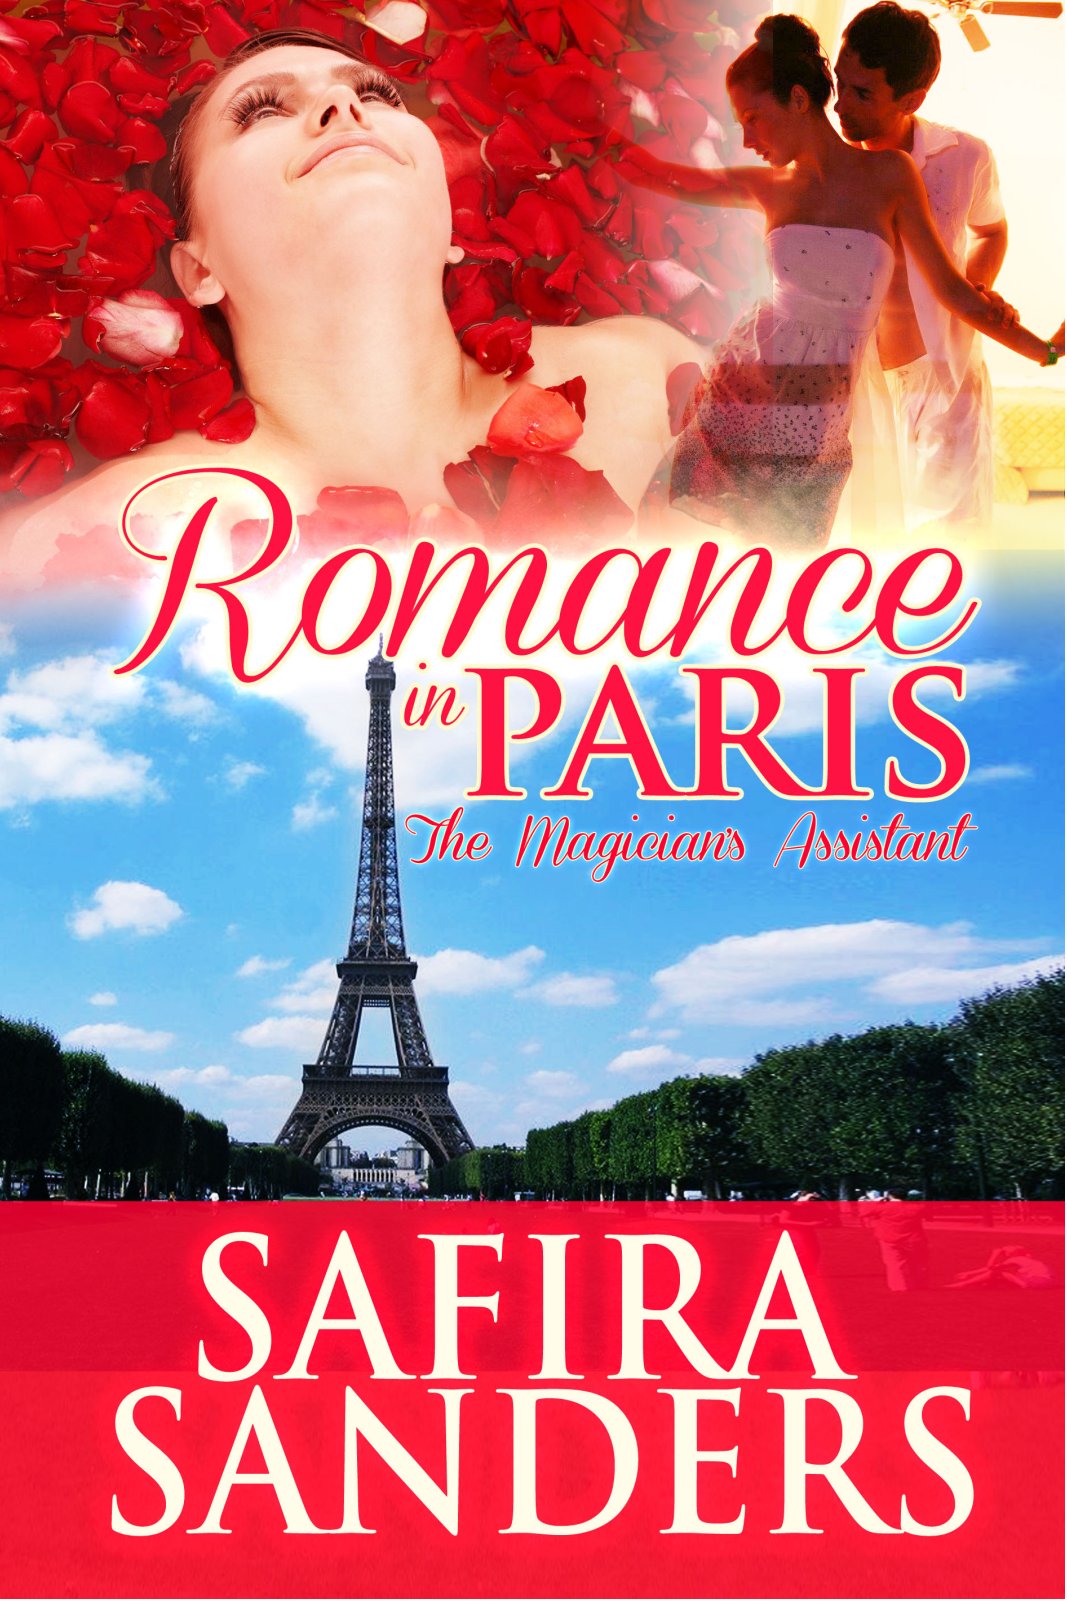 Romance In Paris - The Magician's Assistant by Safira Sanders